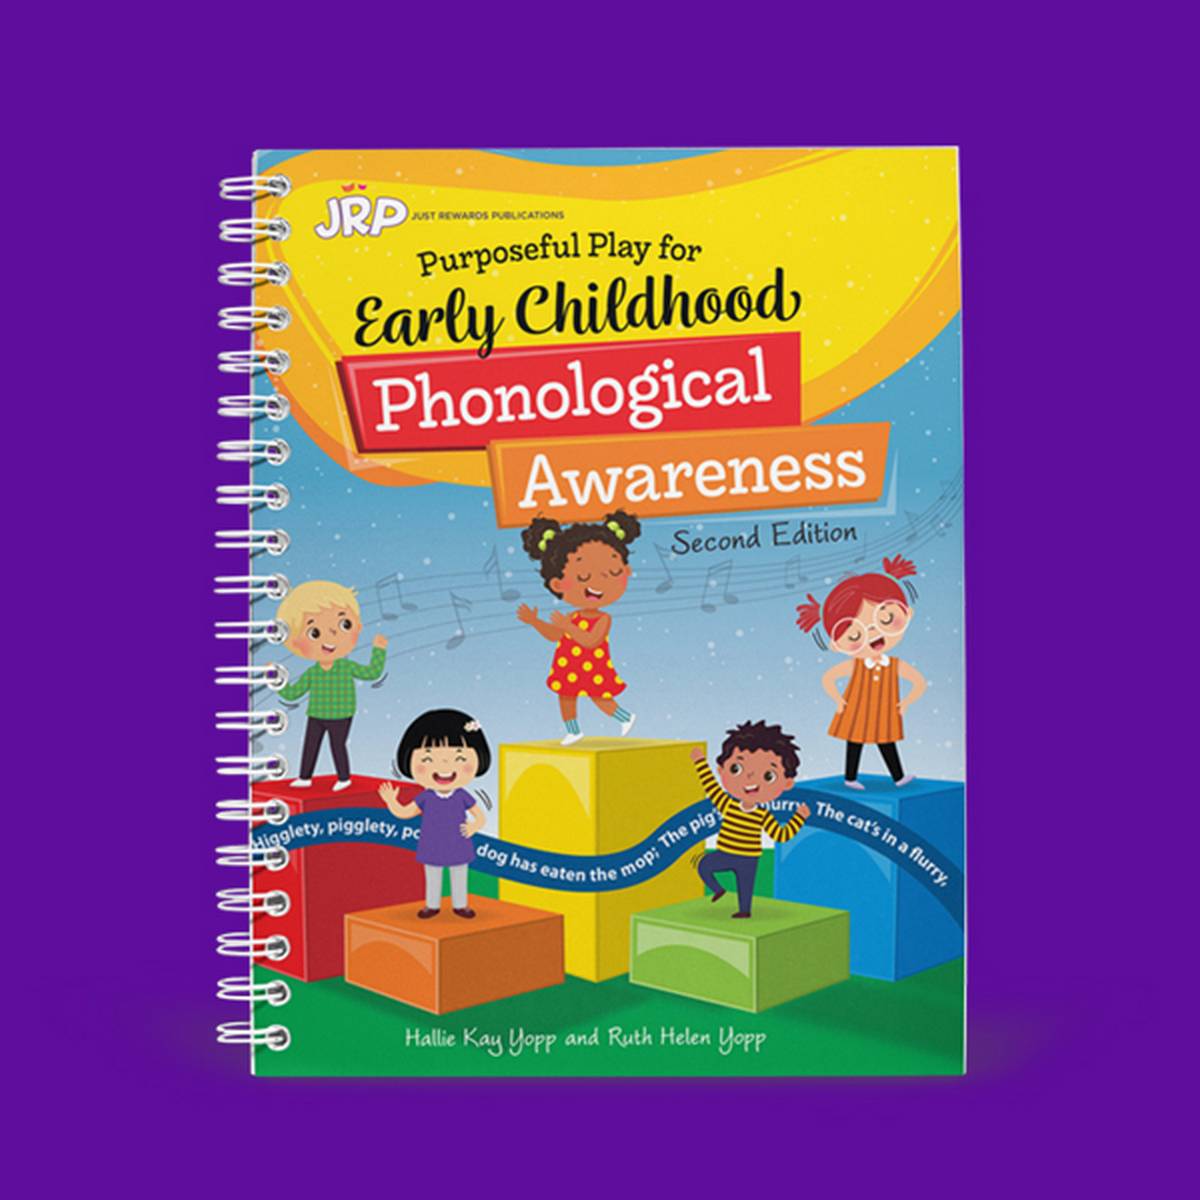 School　Purposeful　Childhood　Play　ABC　for　Early　Phonological　Awareness　–　Supplies